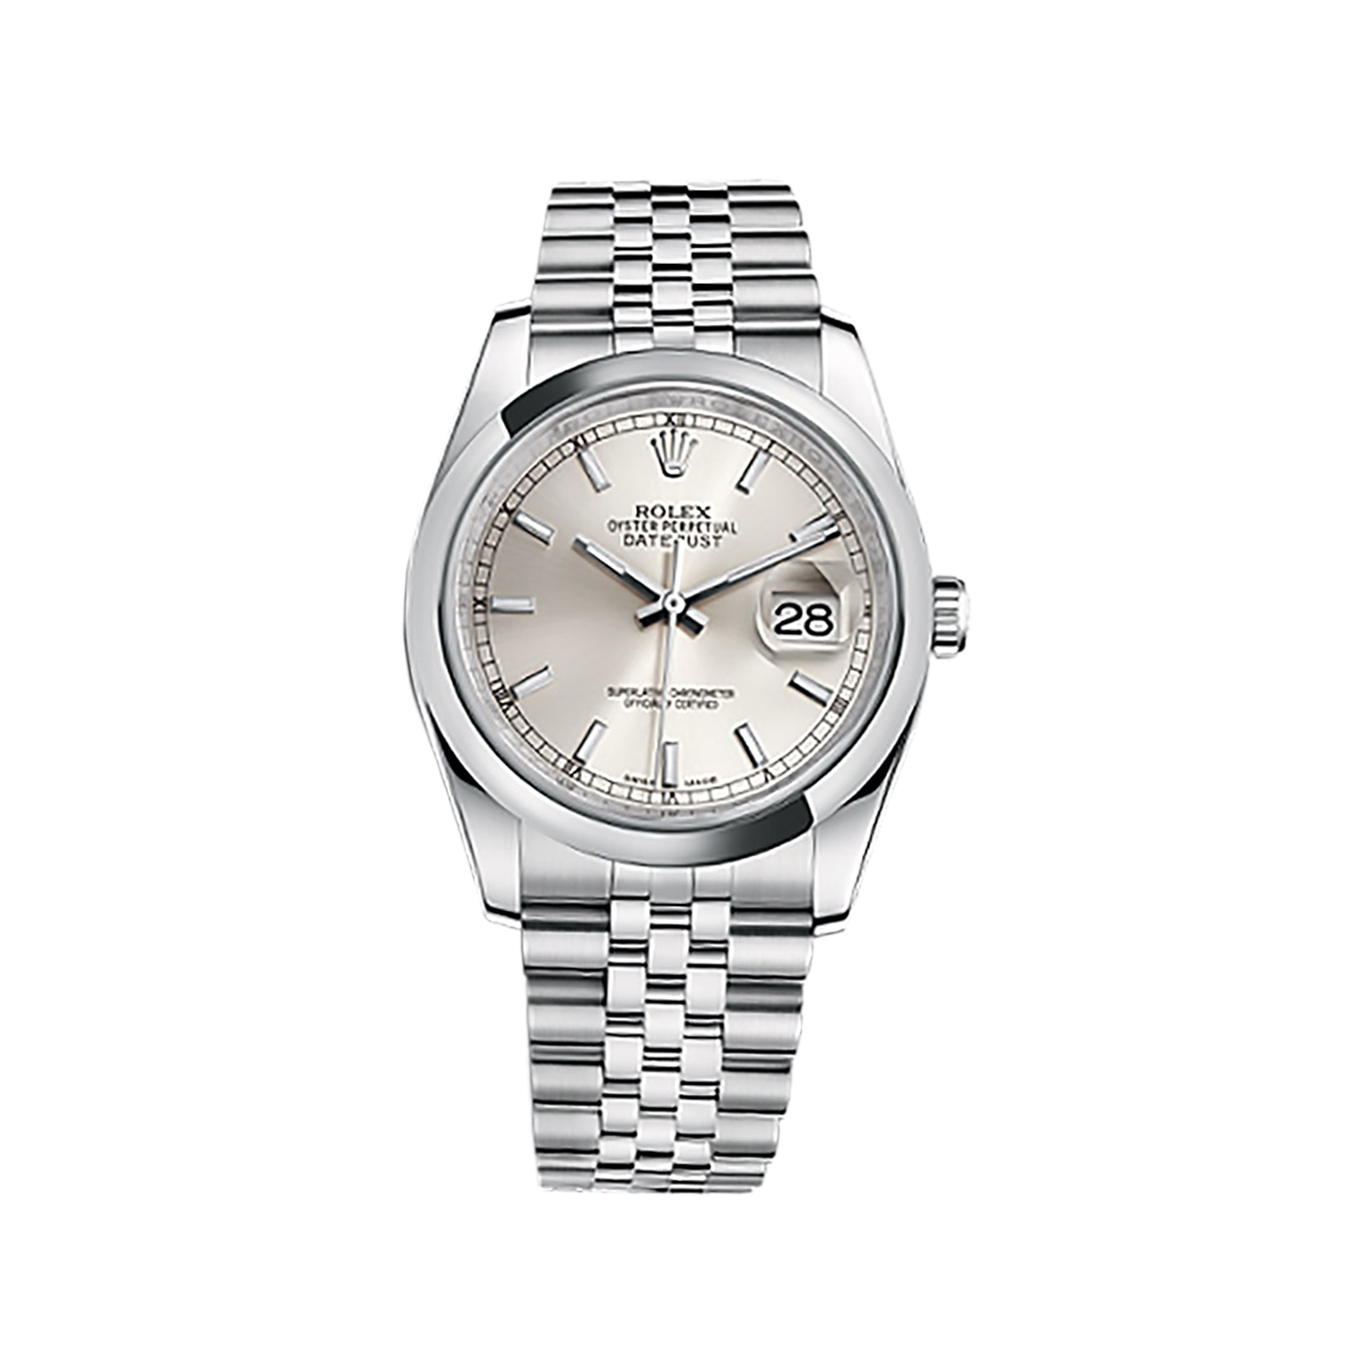 Datejust 36 116200 Stainless Steel Watch (Silver)